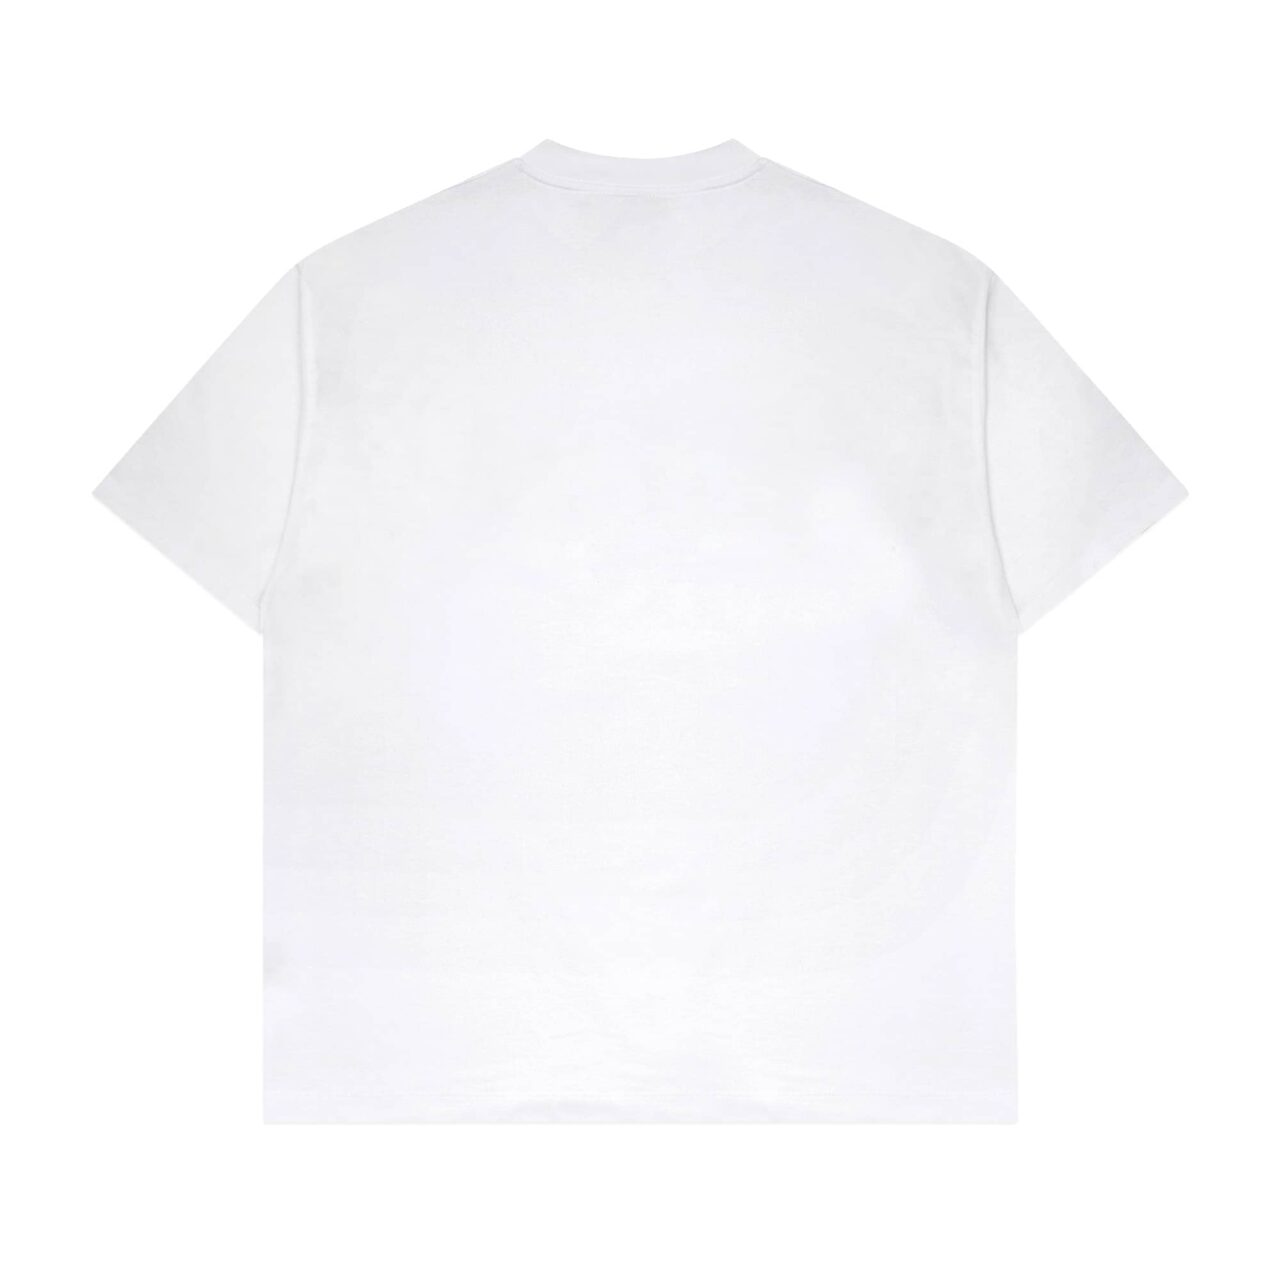 Premium White Studio Innate Branded T-Shirt | Limited Edition Official ...